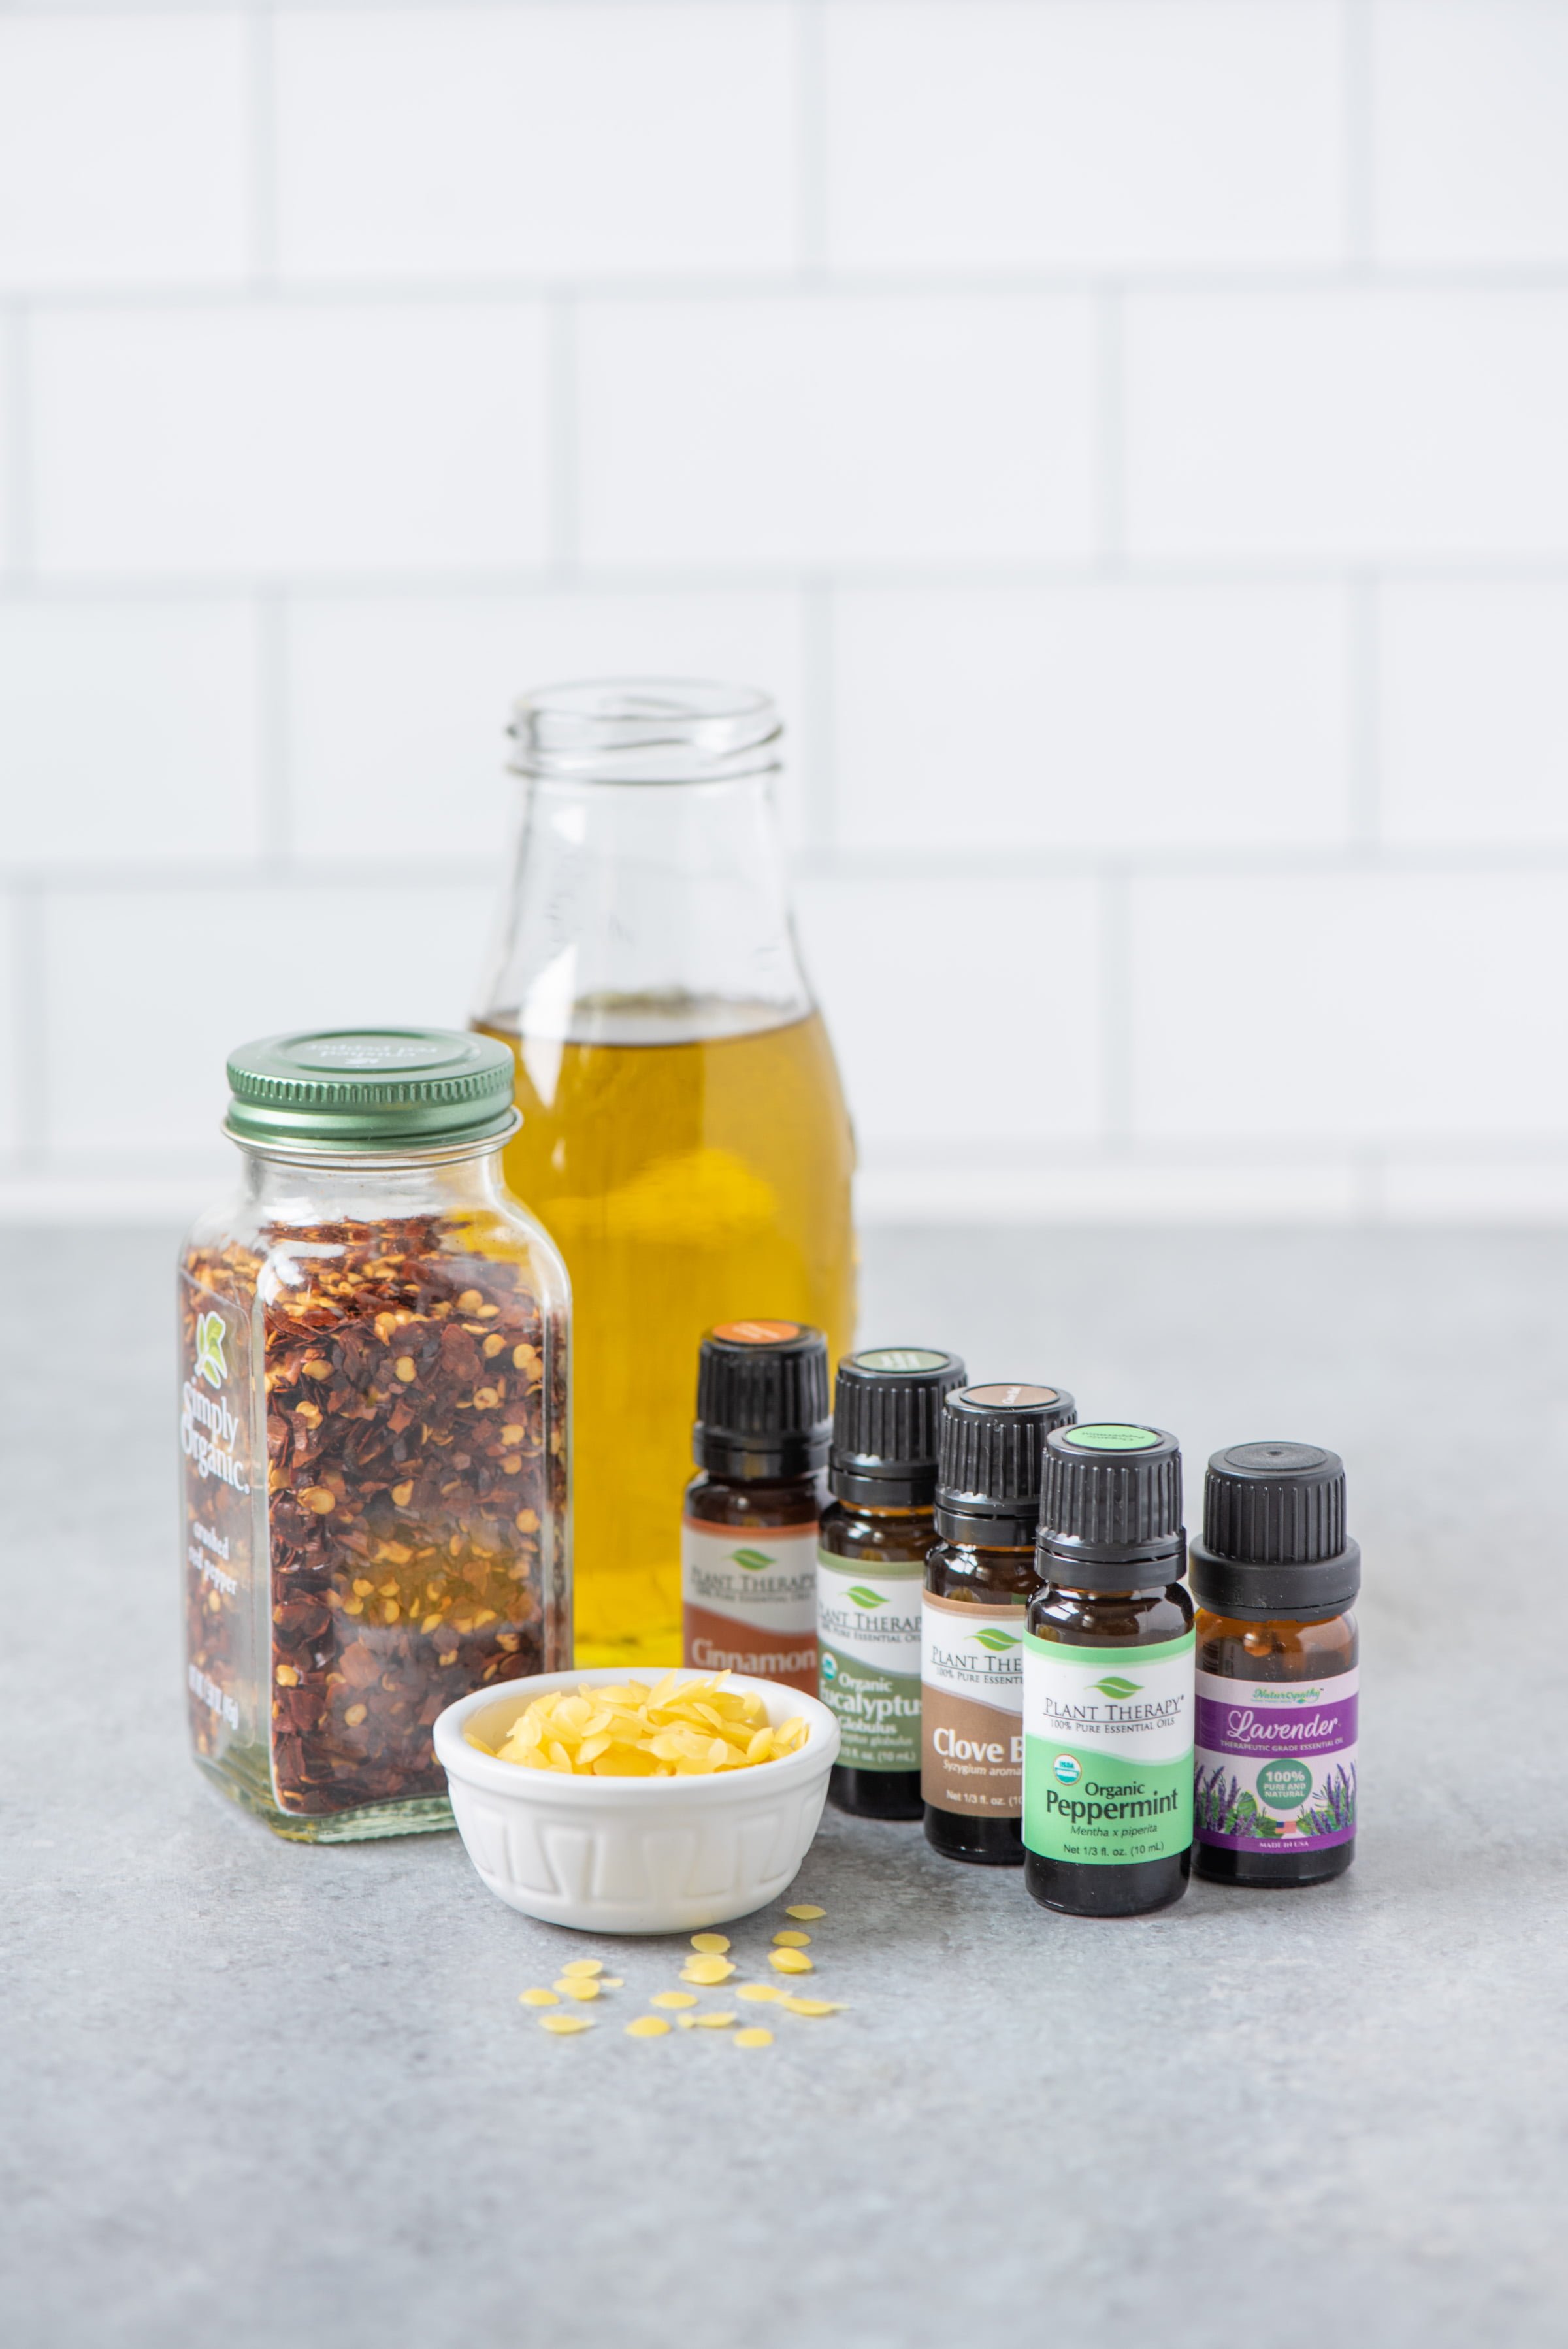 Ingredients for DIY Hot and Cold Sore Muscle Rub arranged on a grey counter - oil, essential oils, red pepper flakes, and essential oils.